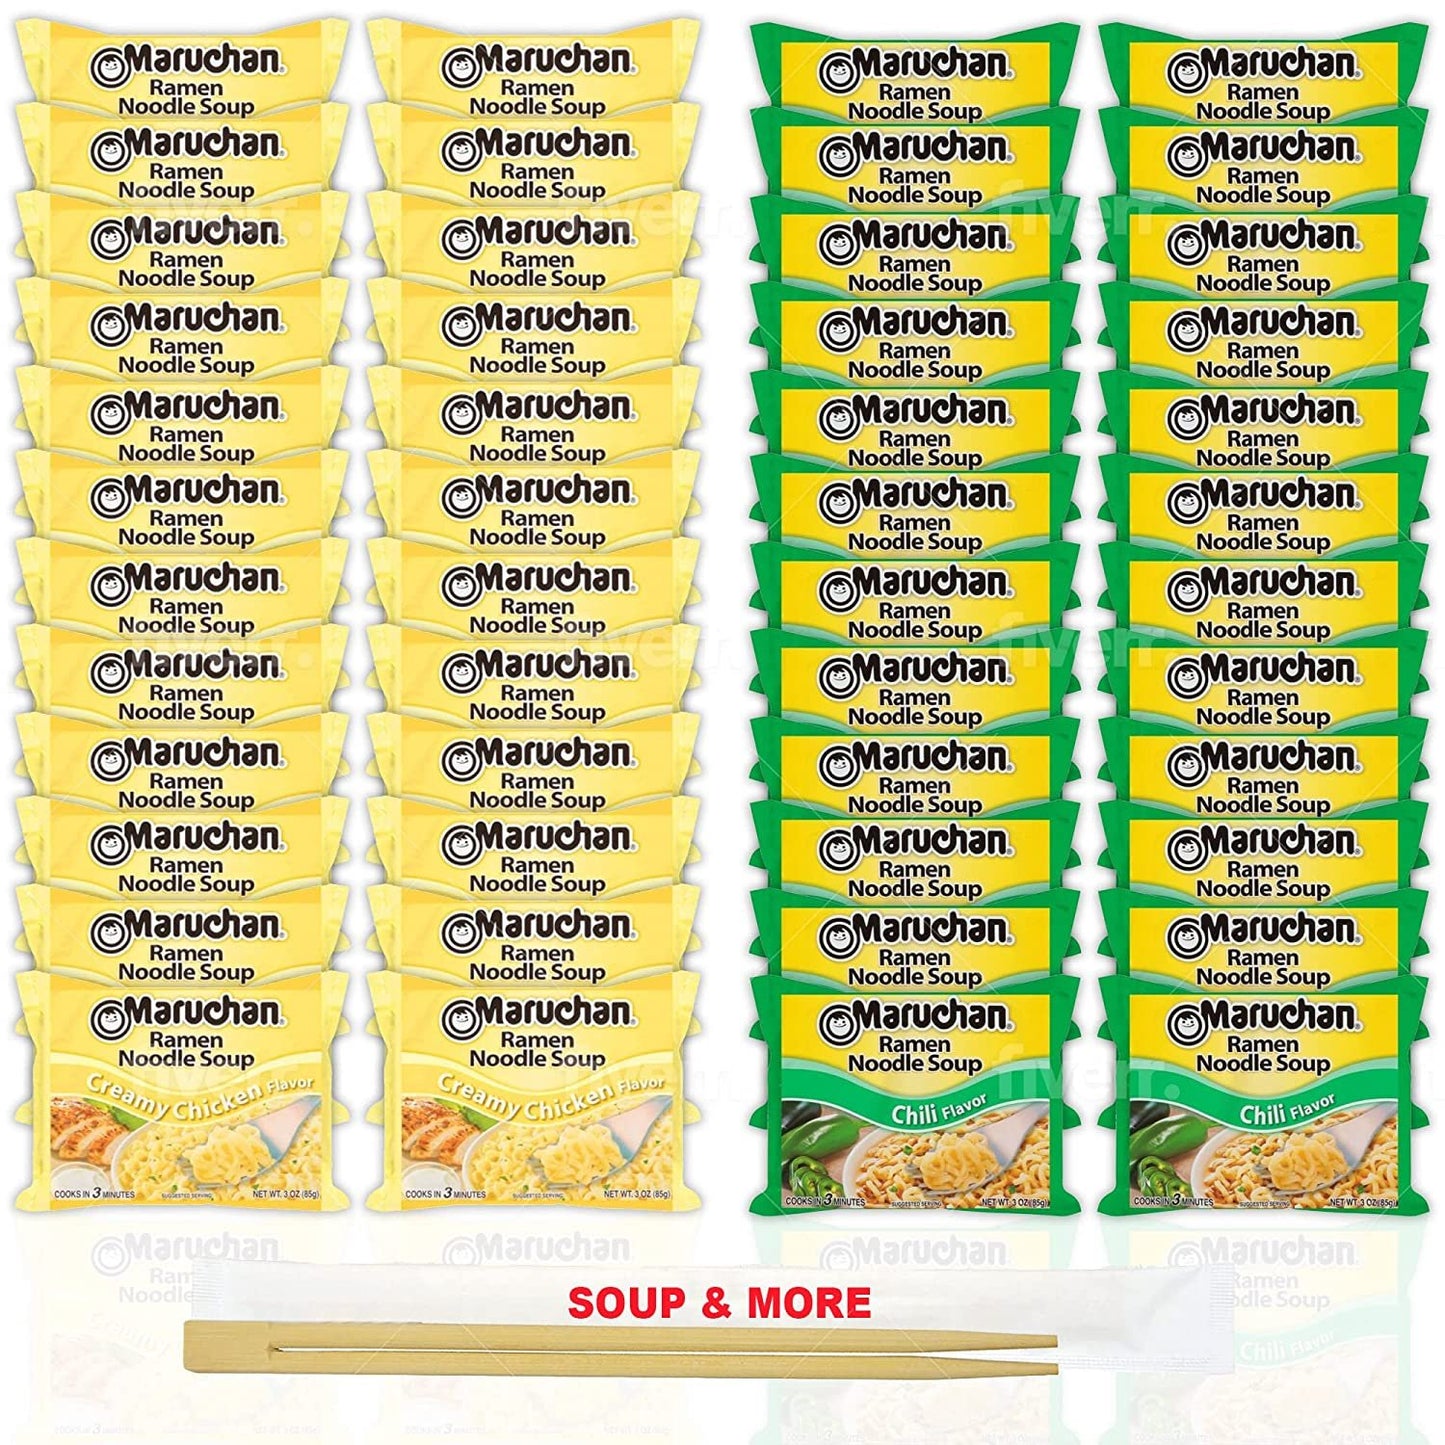 Maruchan Ramen Instant Noodle Soup Variety, 2 Flavors - 24 Packs Creamy Chicken & 24 Packs Chili , 3 Ounce Single Servings Lunch / Dinner Variety